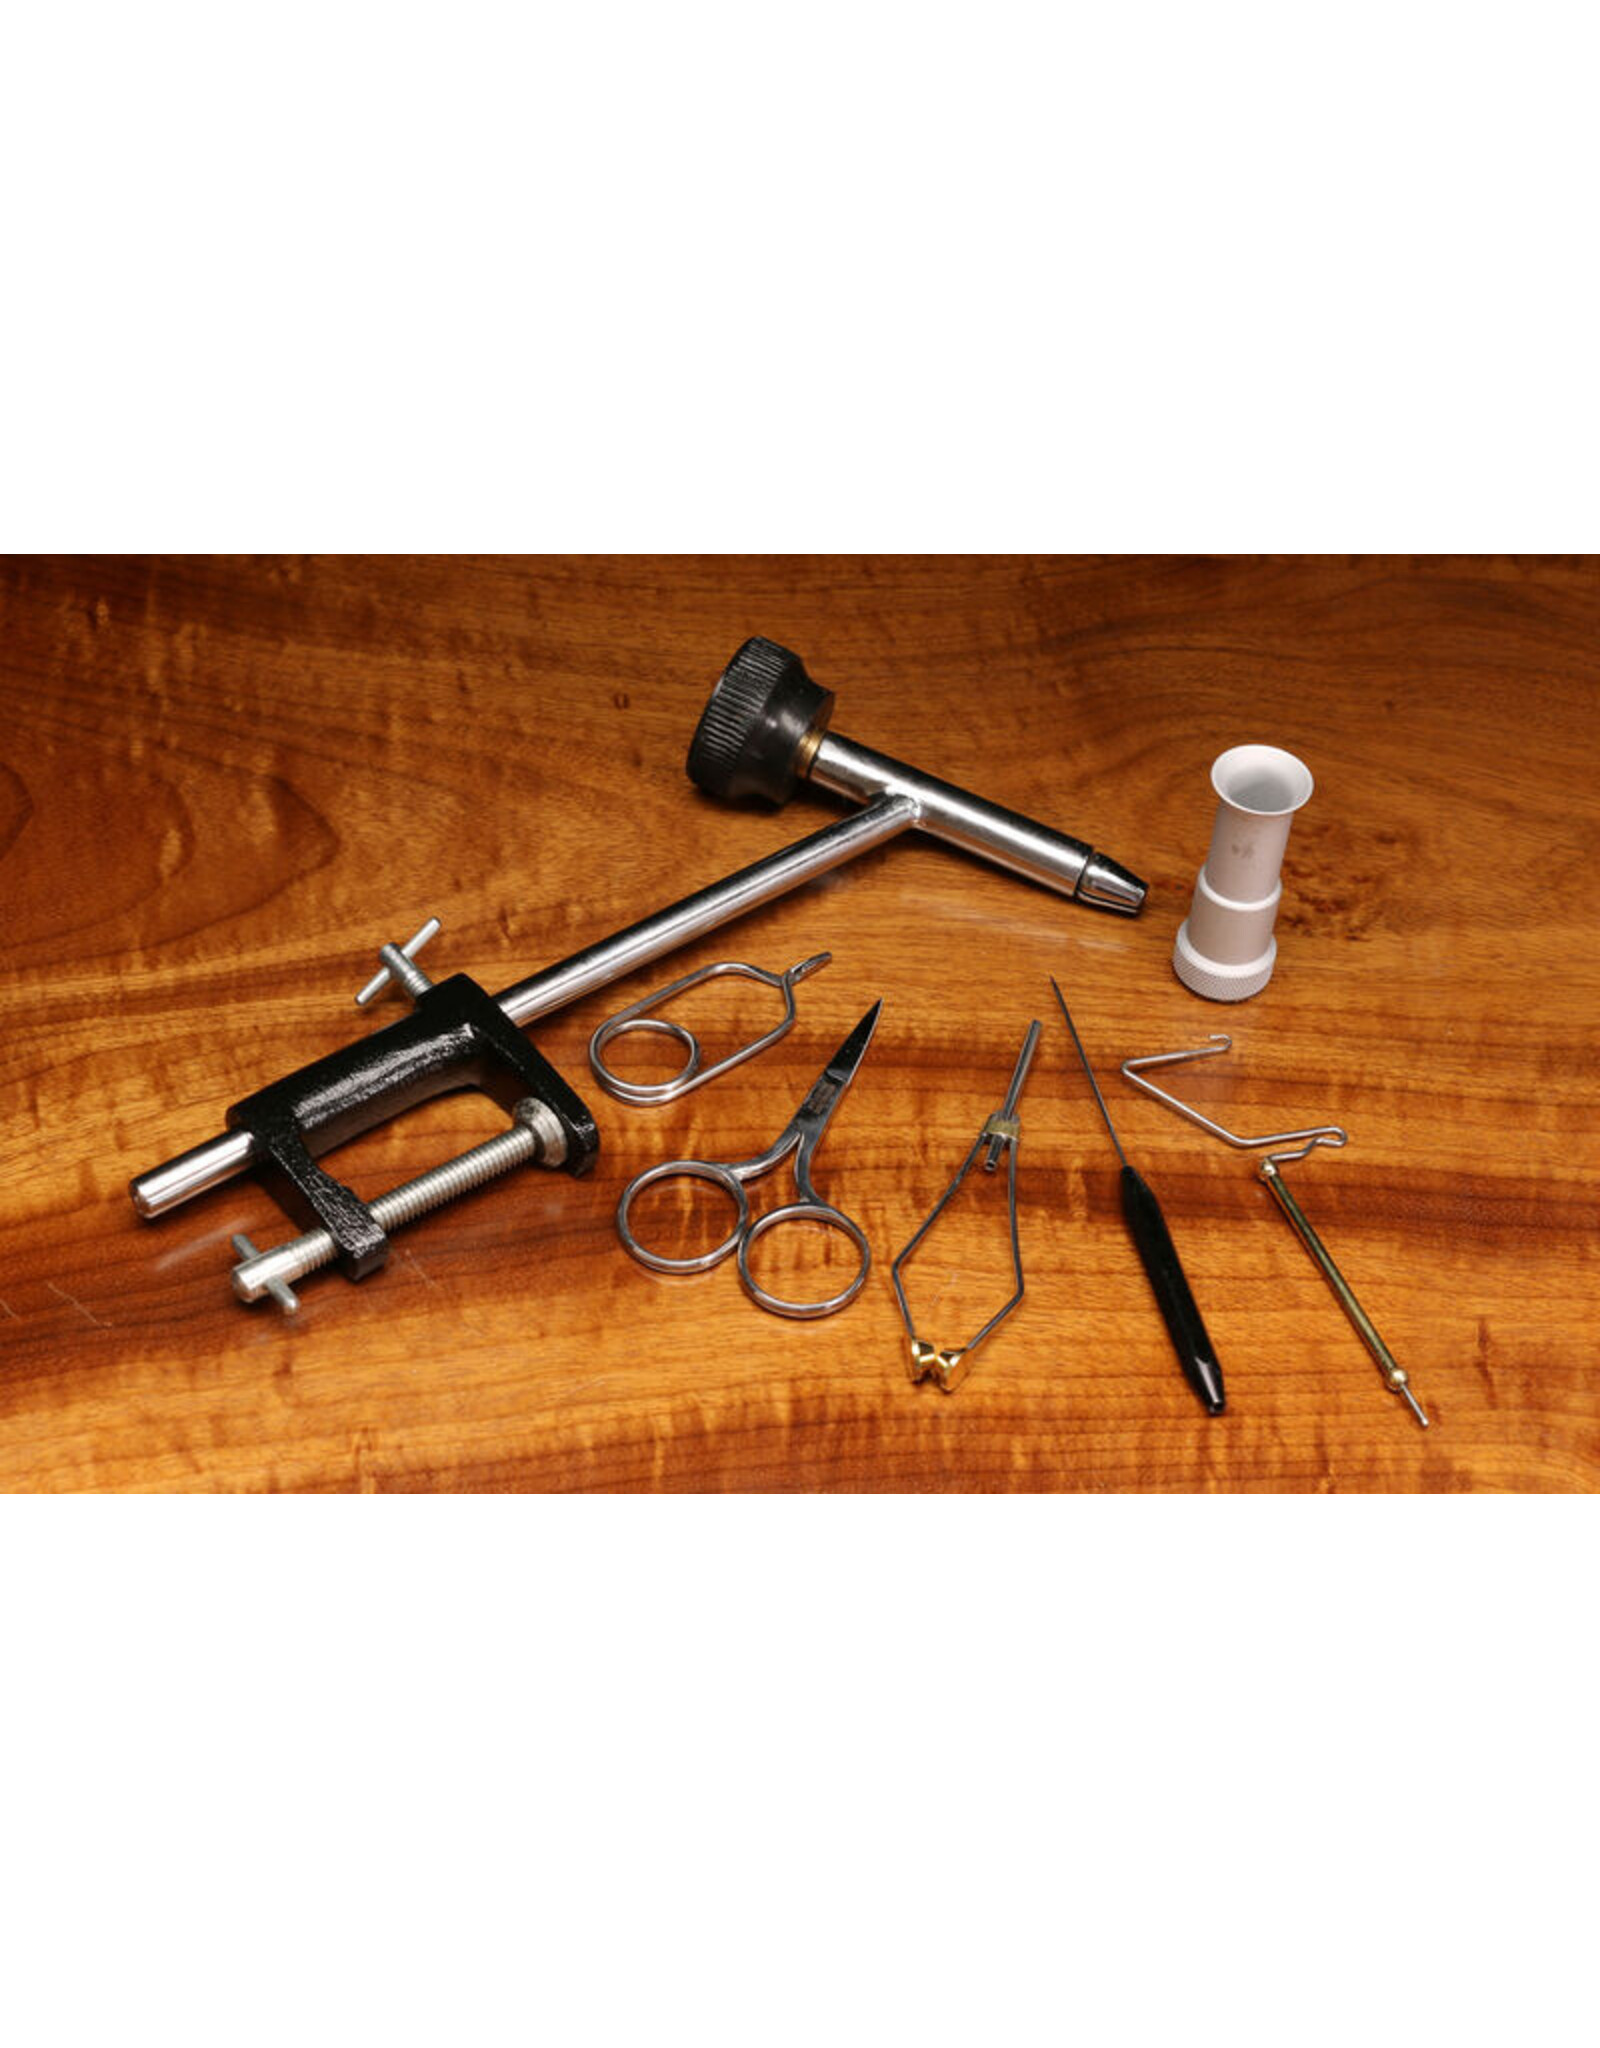 Hareline Hareline Fly Tying Material Kit With Economy Tools and Vise